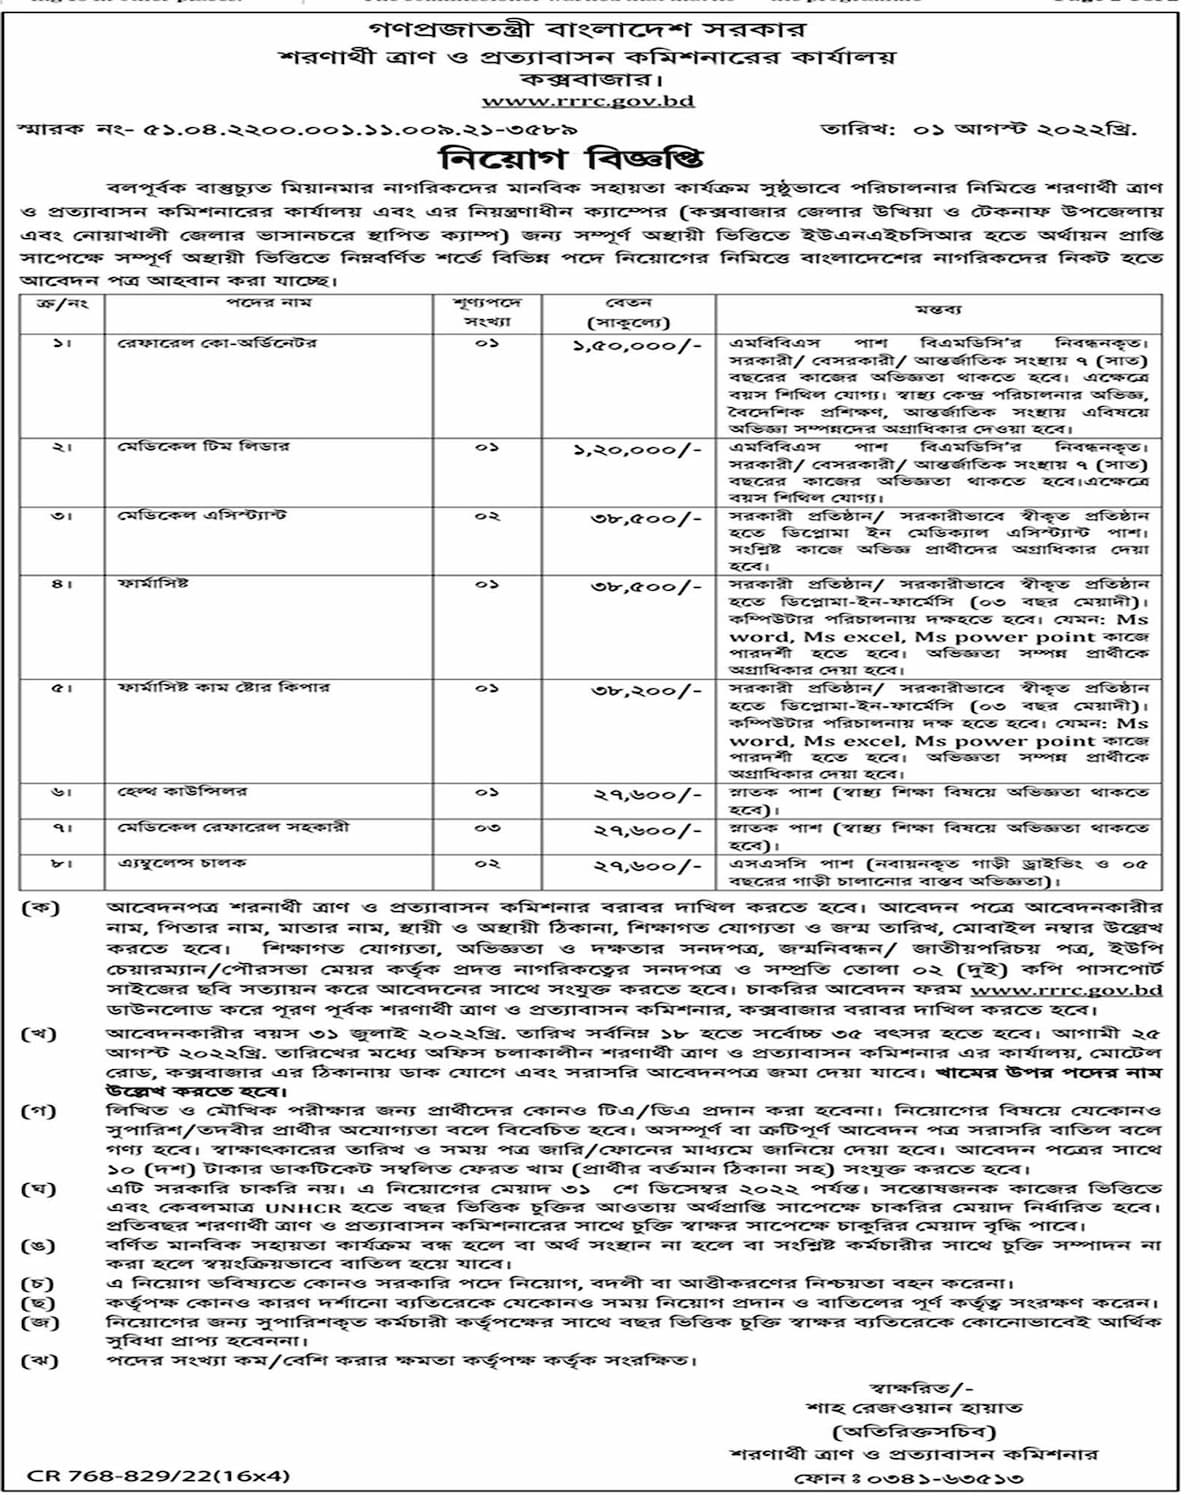 Office of Refugee Relief and Repatriation Commissioner Recruitment Circular 2022